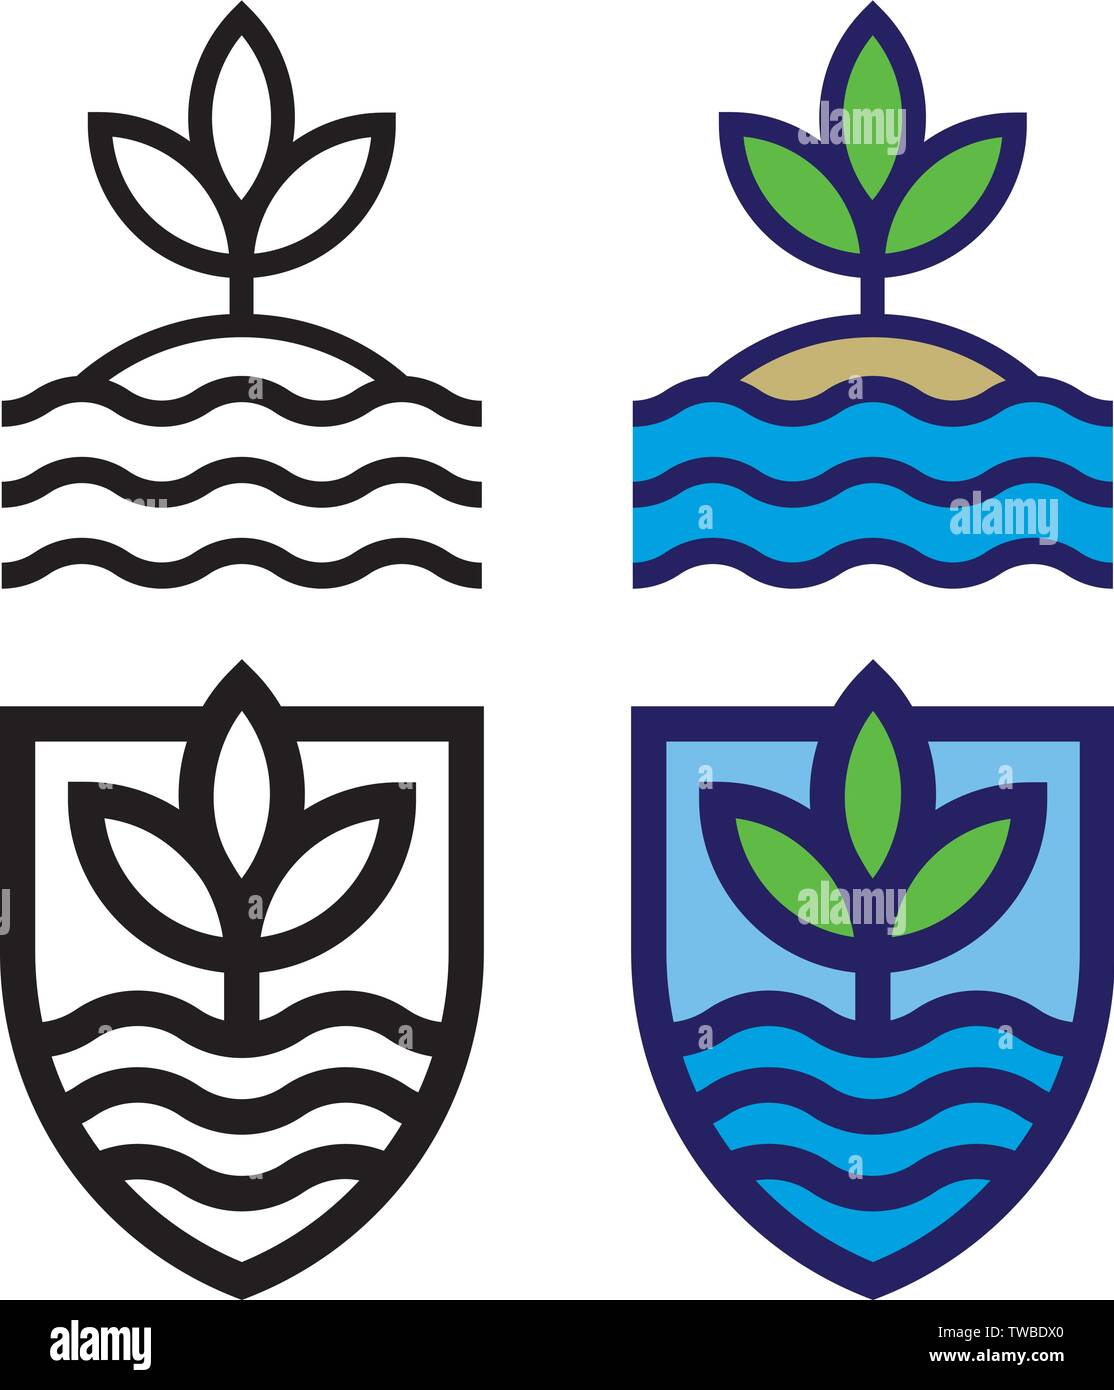 Set of land, sea and sky mono-line emblems. Bold outline, flat design graphics showing waves, leaves and sky. isolated and shield shape versions. Stock Vector